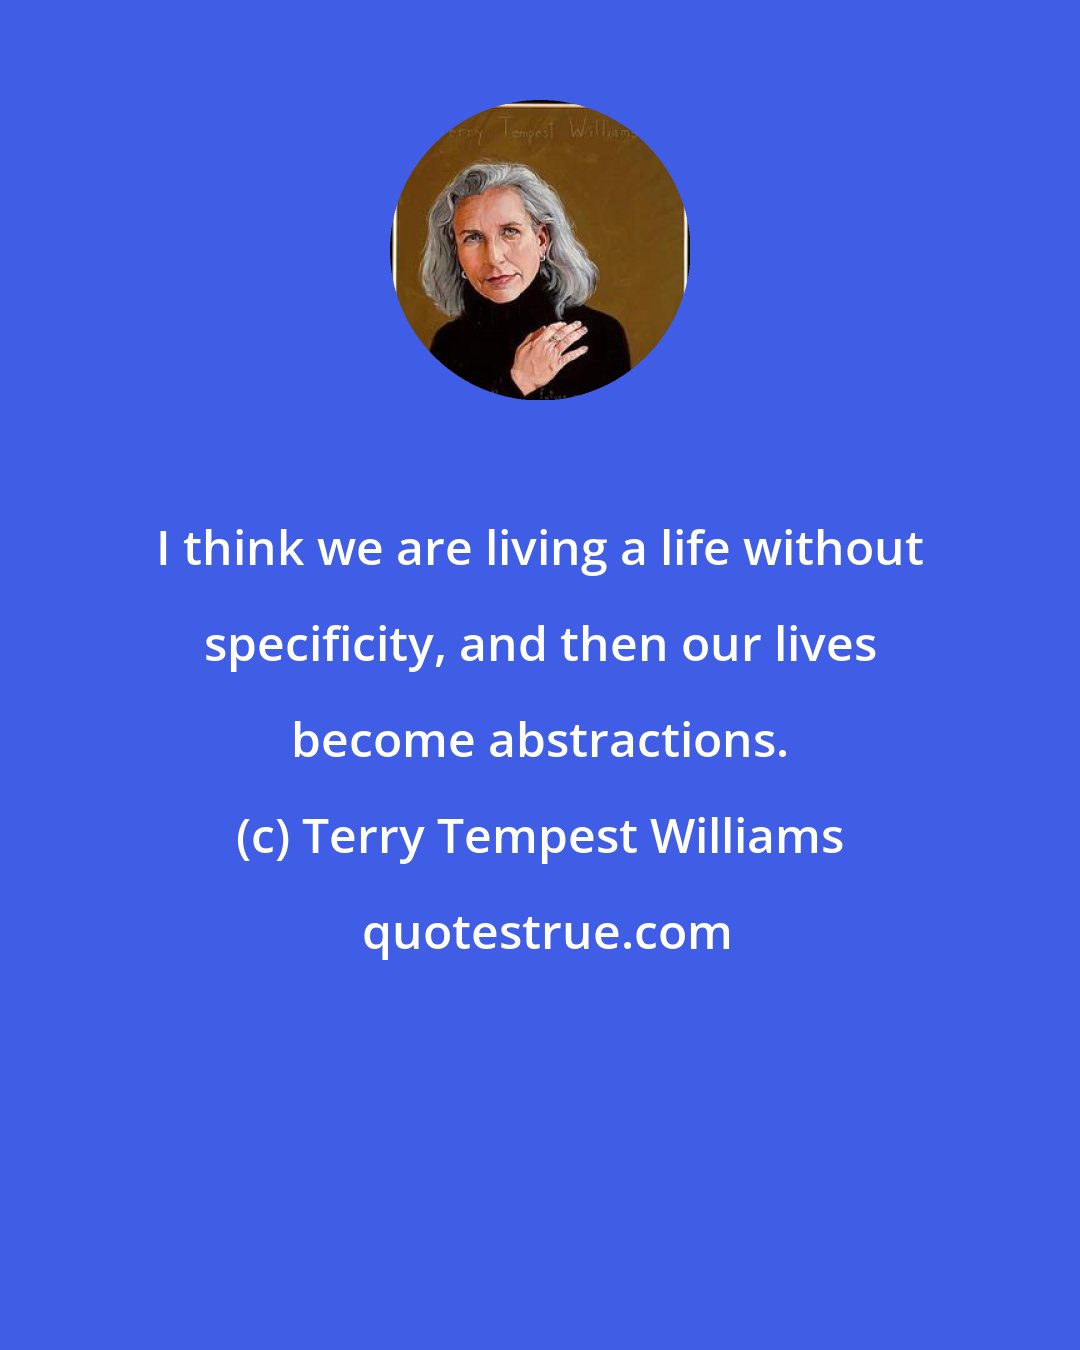 Terry Tempest Williams: I think we are living a life without specificity, and then our lives become abstractions.